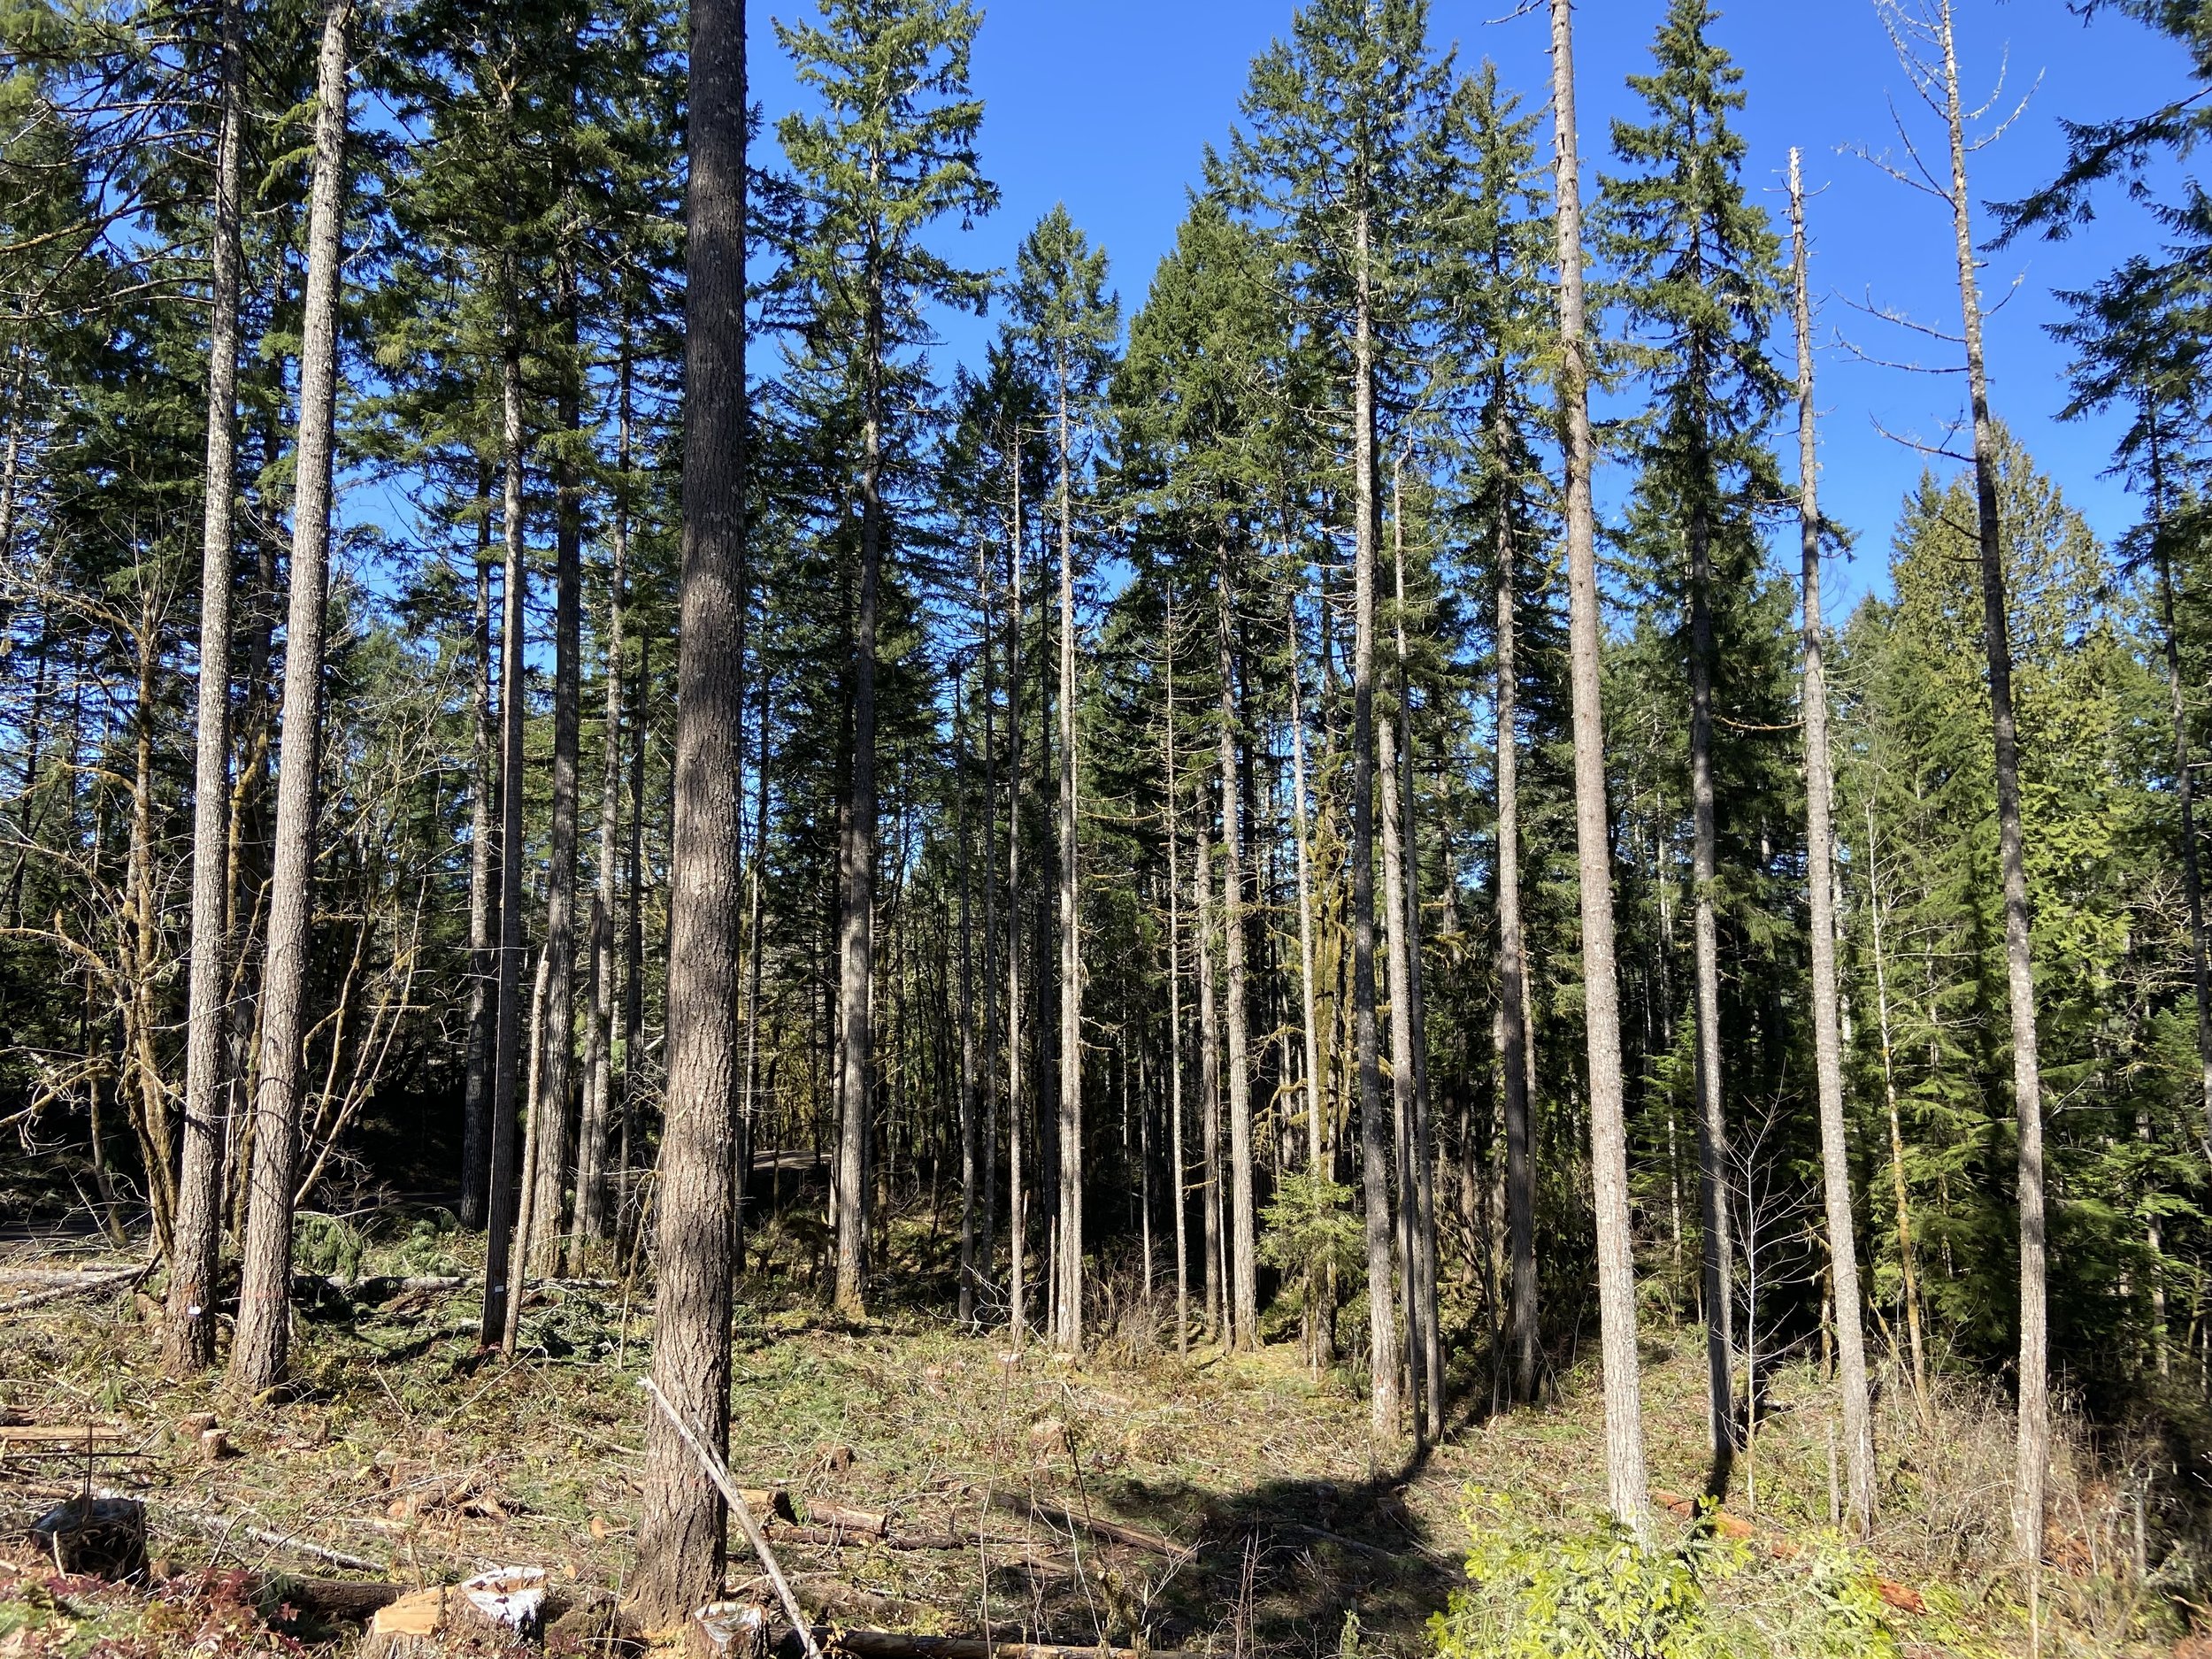 1-forest- Site of restoration forestry project - U.S. Bureau of Land Management - Oregon - source of wood for mass plywood panels, Redmond Senior and Community Center - photo by SNW -5.jpg